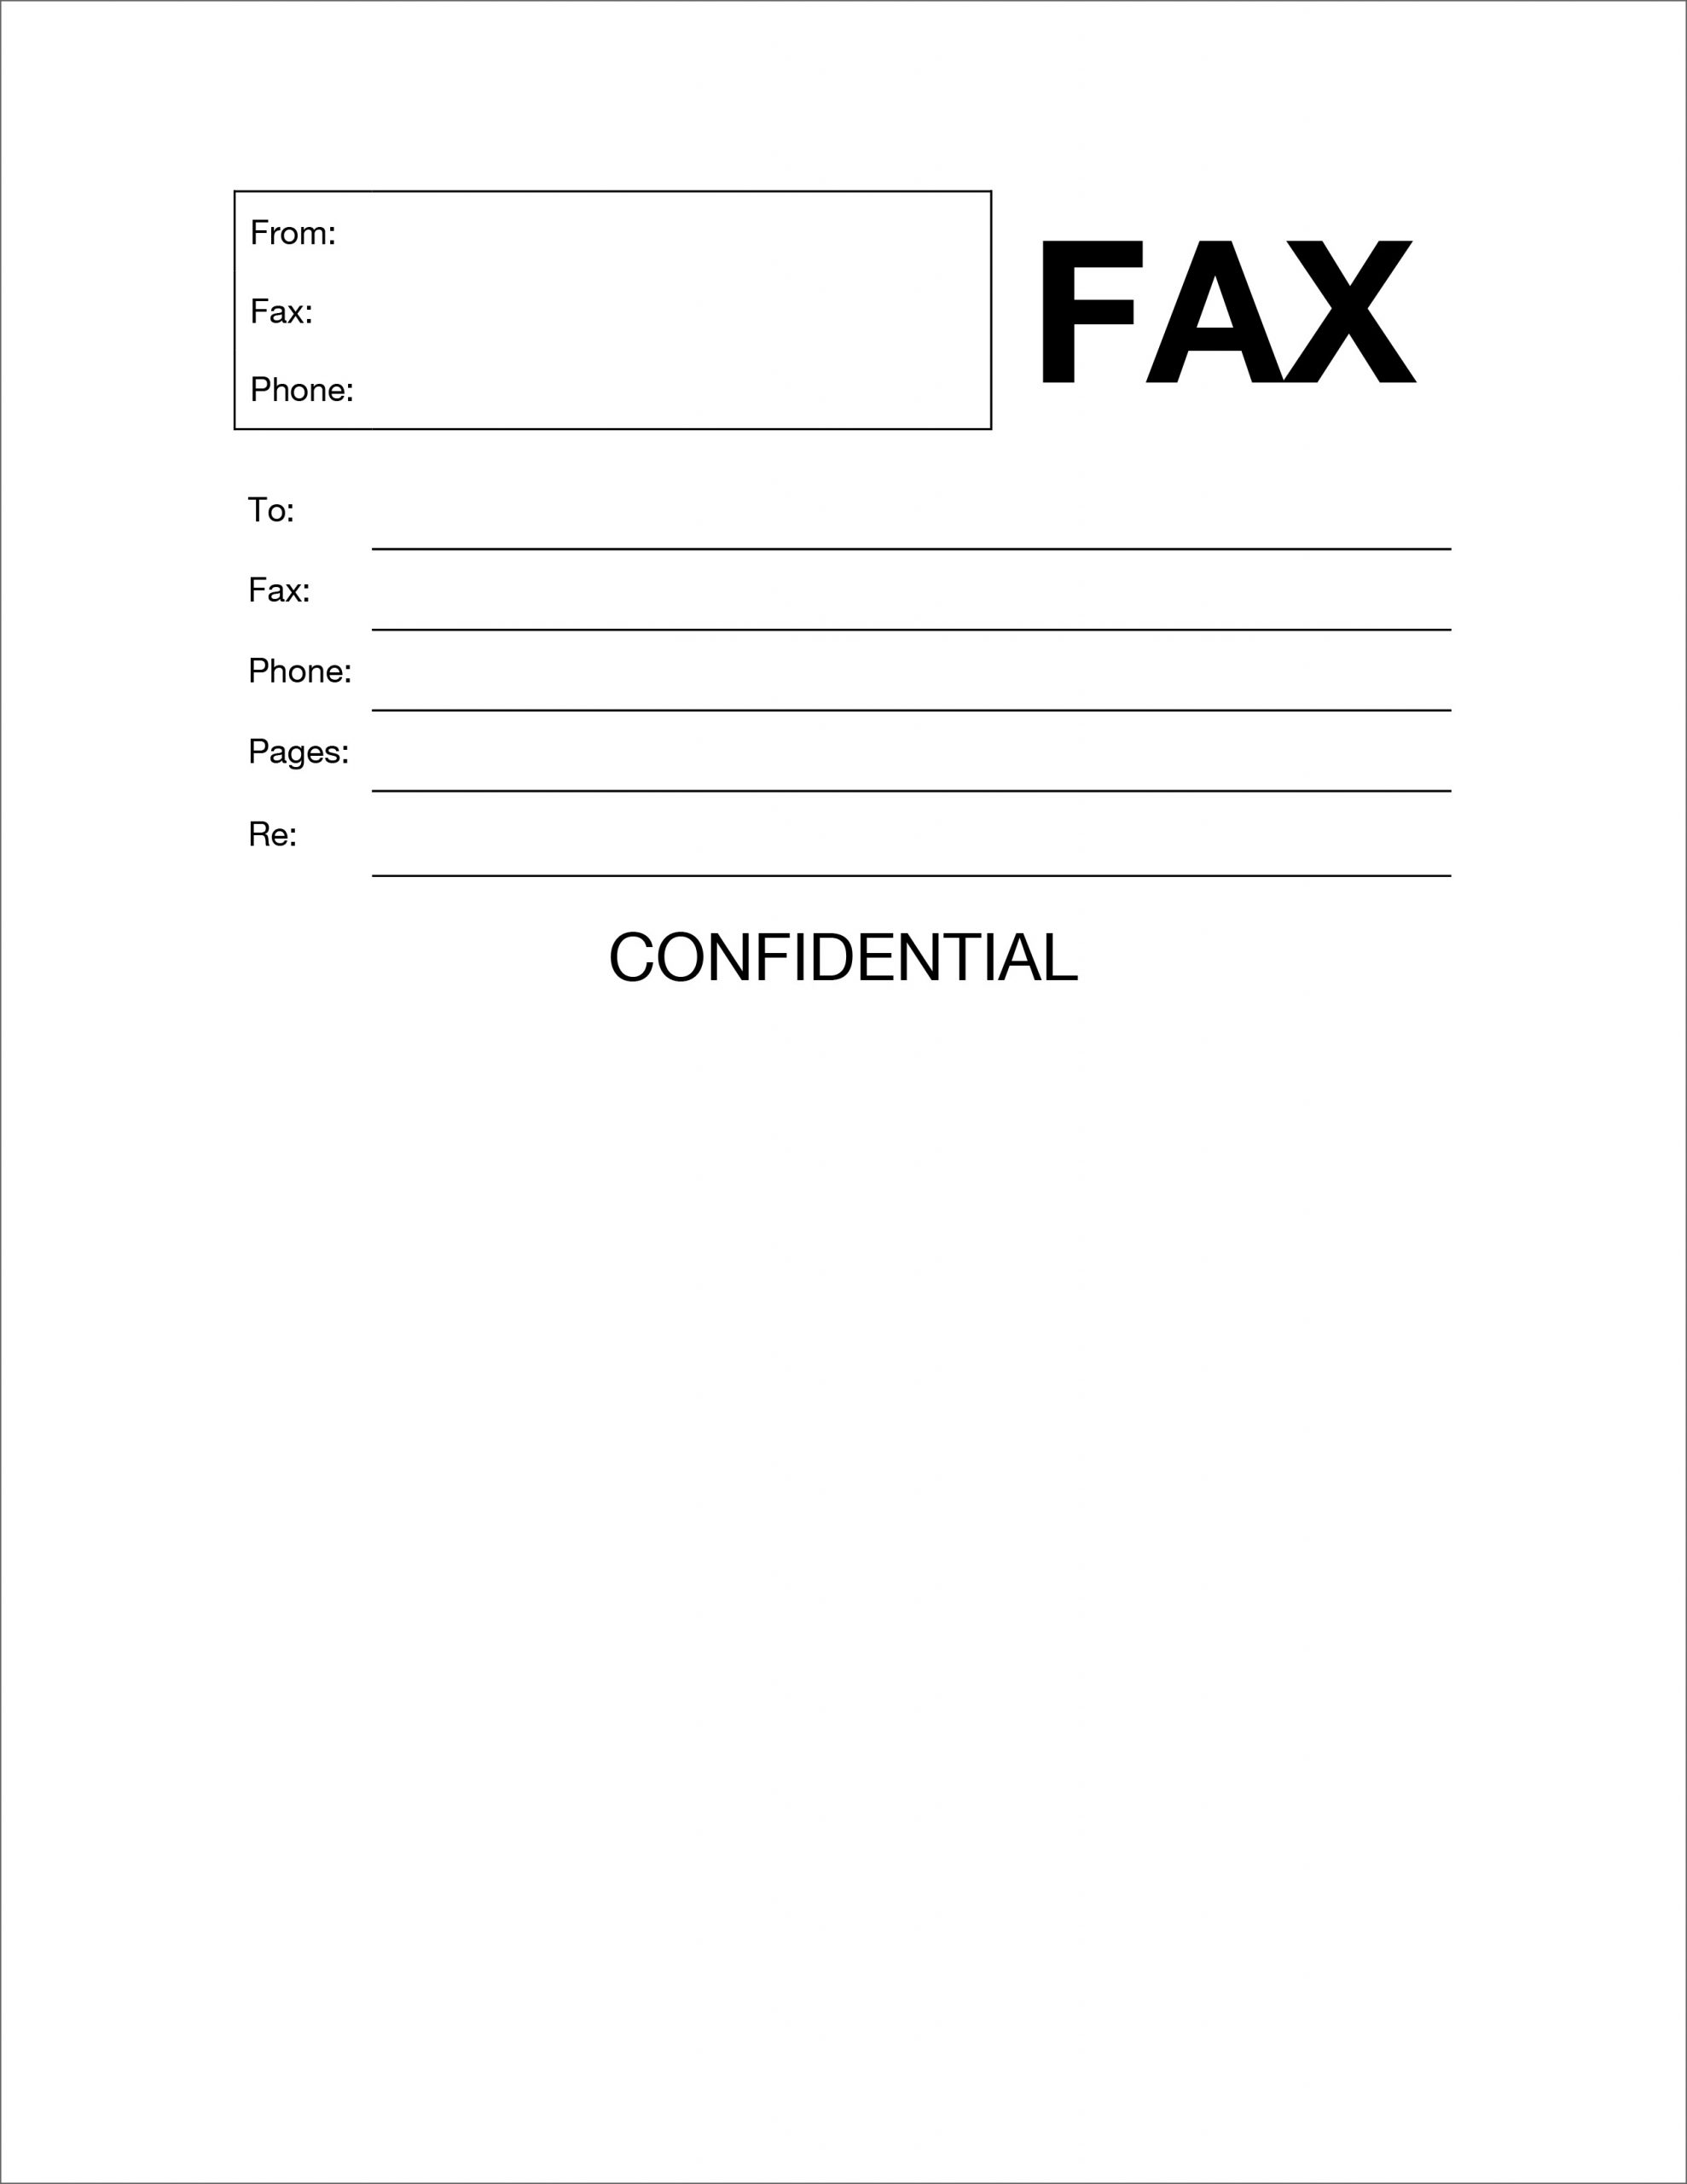 cover letter for fax